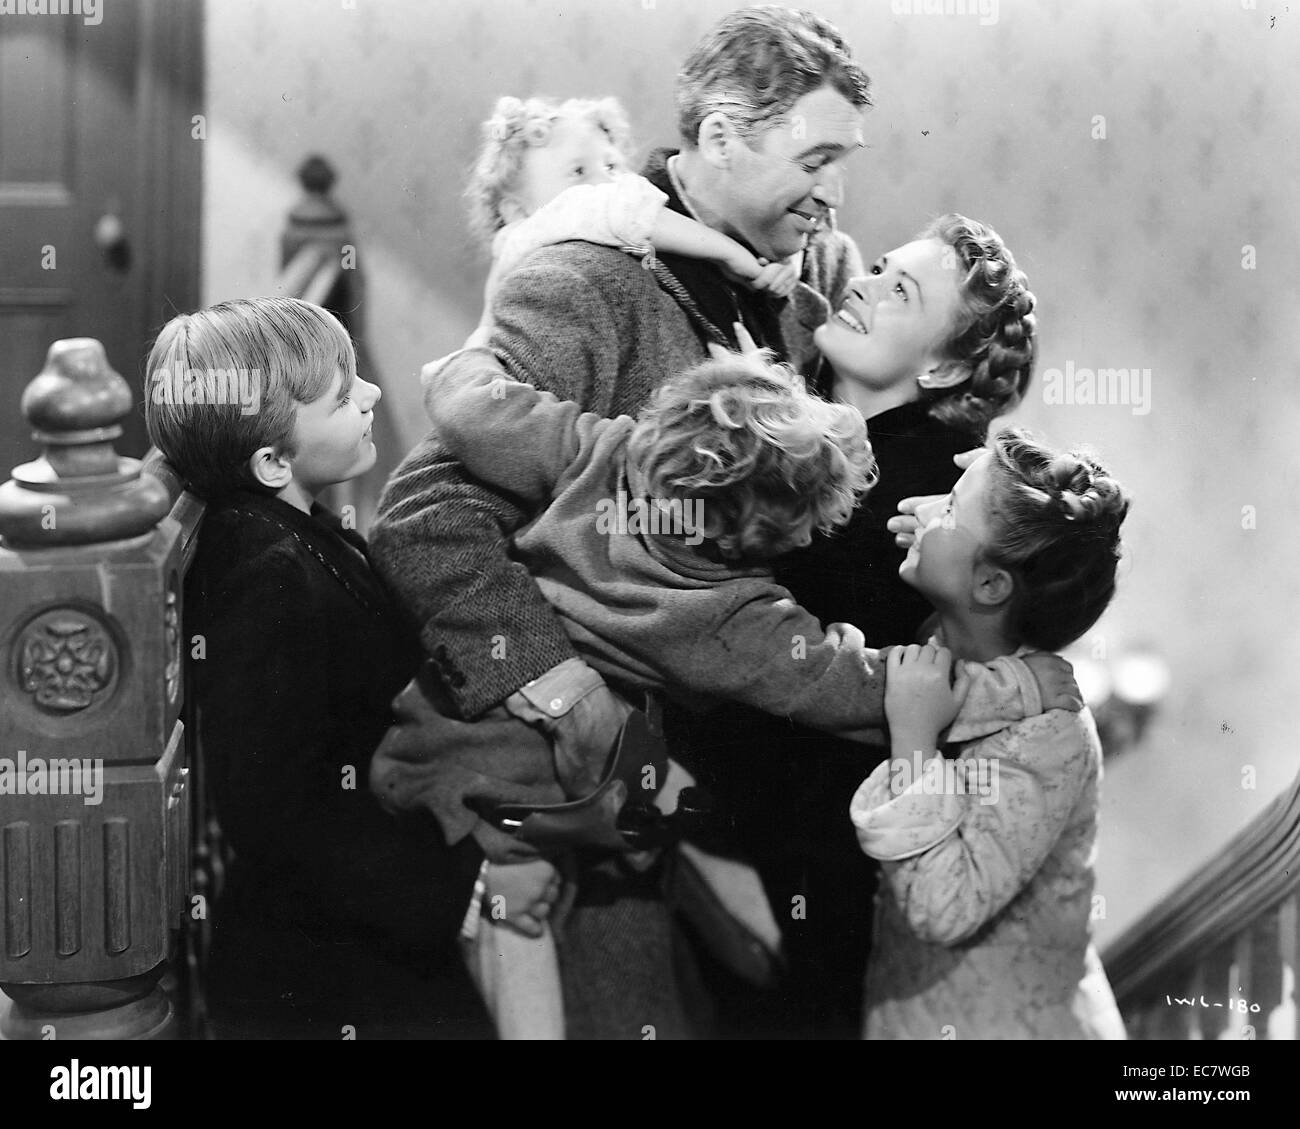 It's a Wonderful Life is a 1946 American Christmas fantasy comedy-drama film produced and directed by Frank Capra and stars James Stewart as George Bailey, a man who has given up his dreams in order to help others and whose imminent suicide on Christmas Eve brings about the intervention of his guardian angel Stock Photo